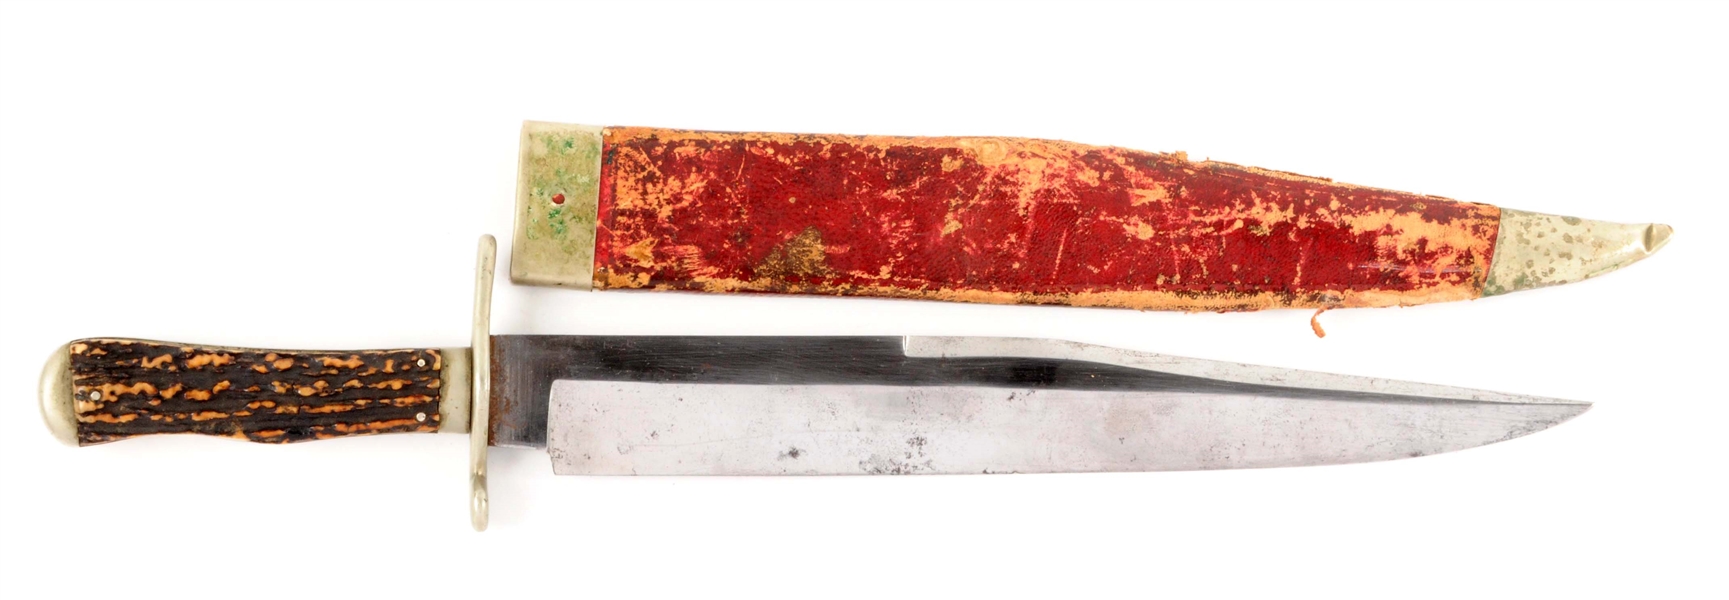 LARGE CLIP POINT BOWIE KNIFE IN SUPERB CONDITION, BY GEO. WOSTENHOLM, SHEFFIELD.